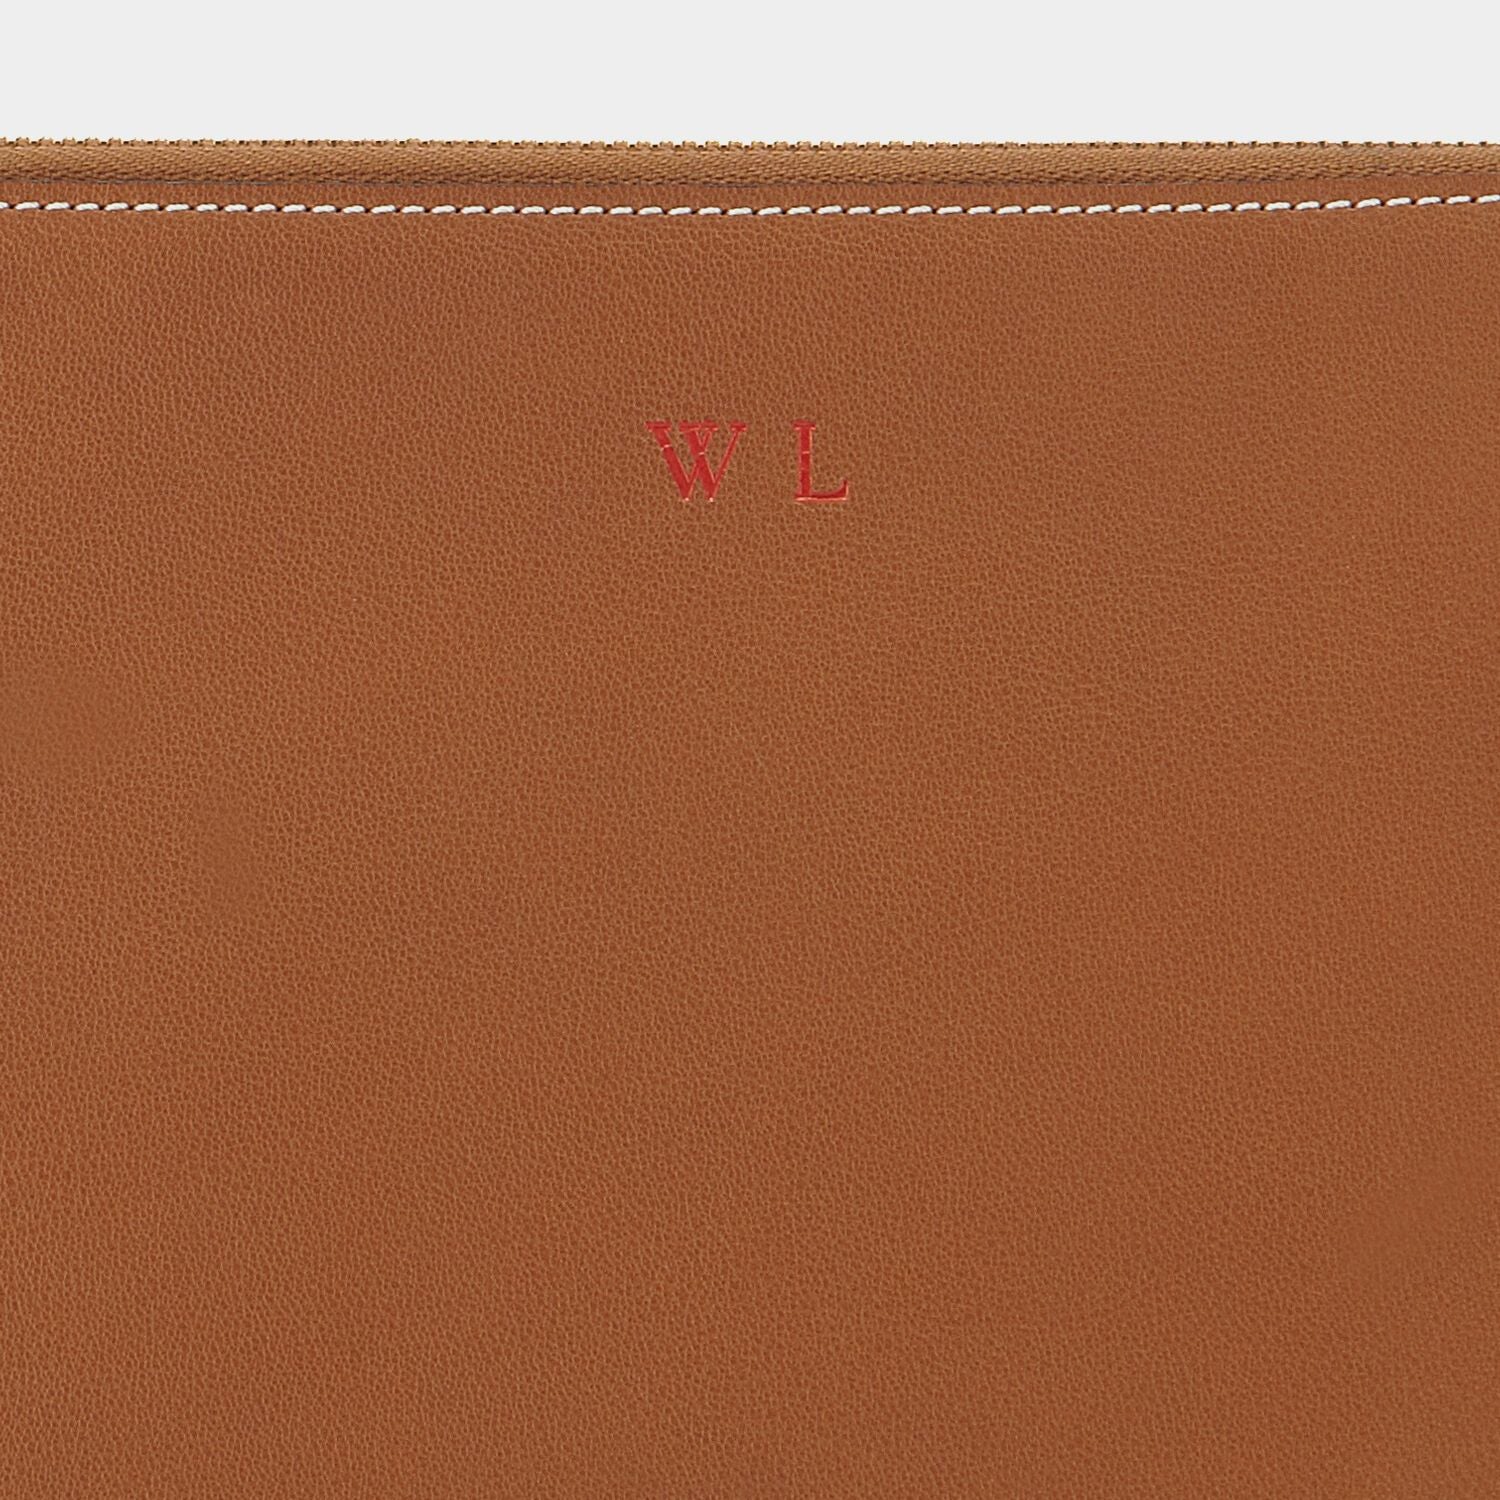 Bespoke Small Document Case -

                  
                    Butter Leather in Tan -
                  

                  Anya Hindmarch EU
